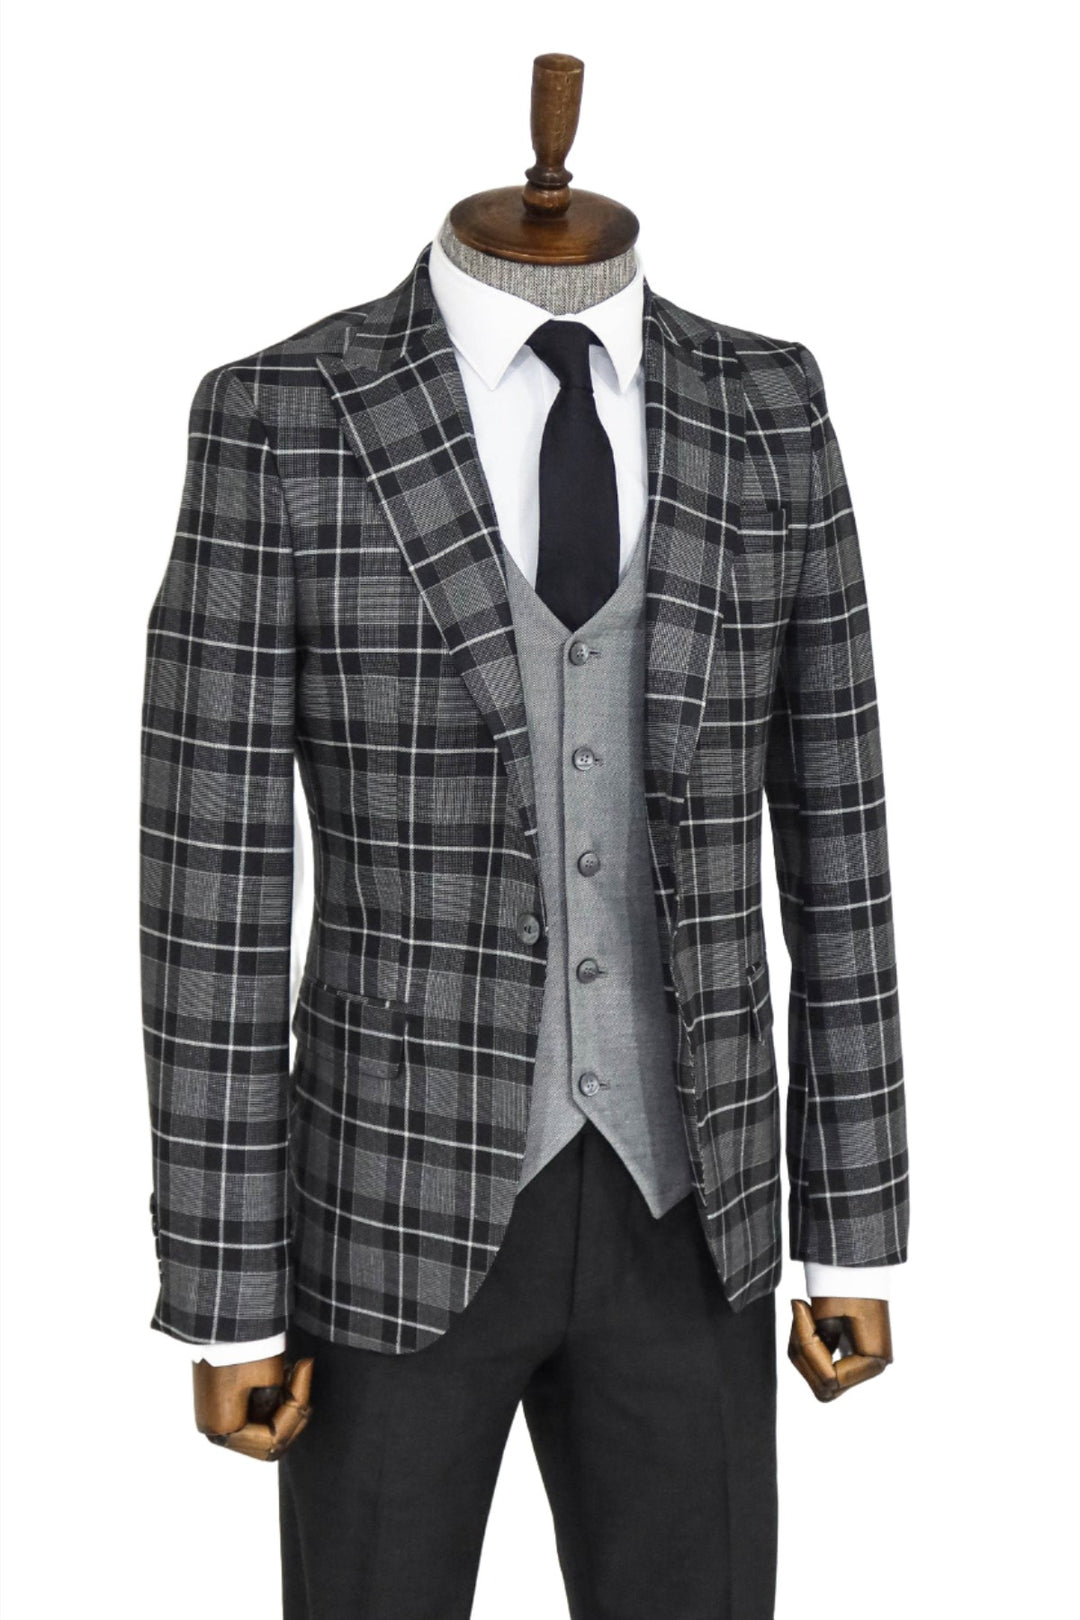 Slim Fit Checked Black Men Suit and Shirt Combination - Wessi